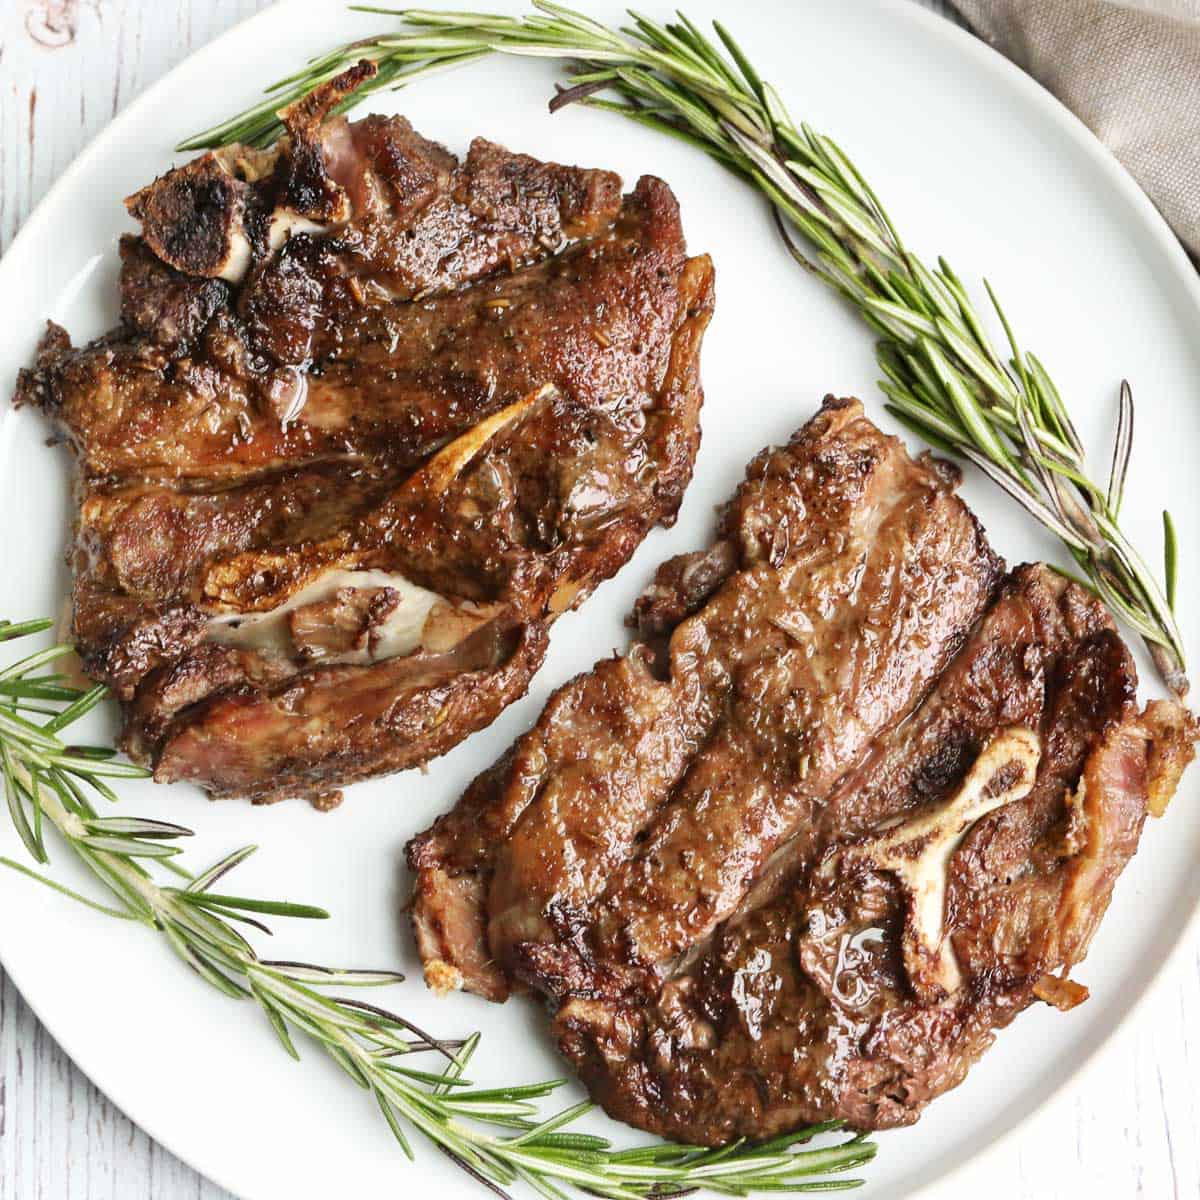 Lamb shoulder chops served on a white plate with a garnish of rosemary.